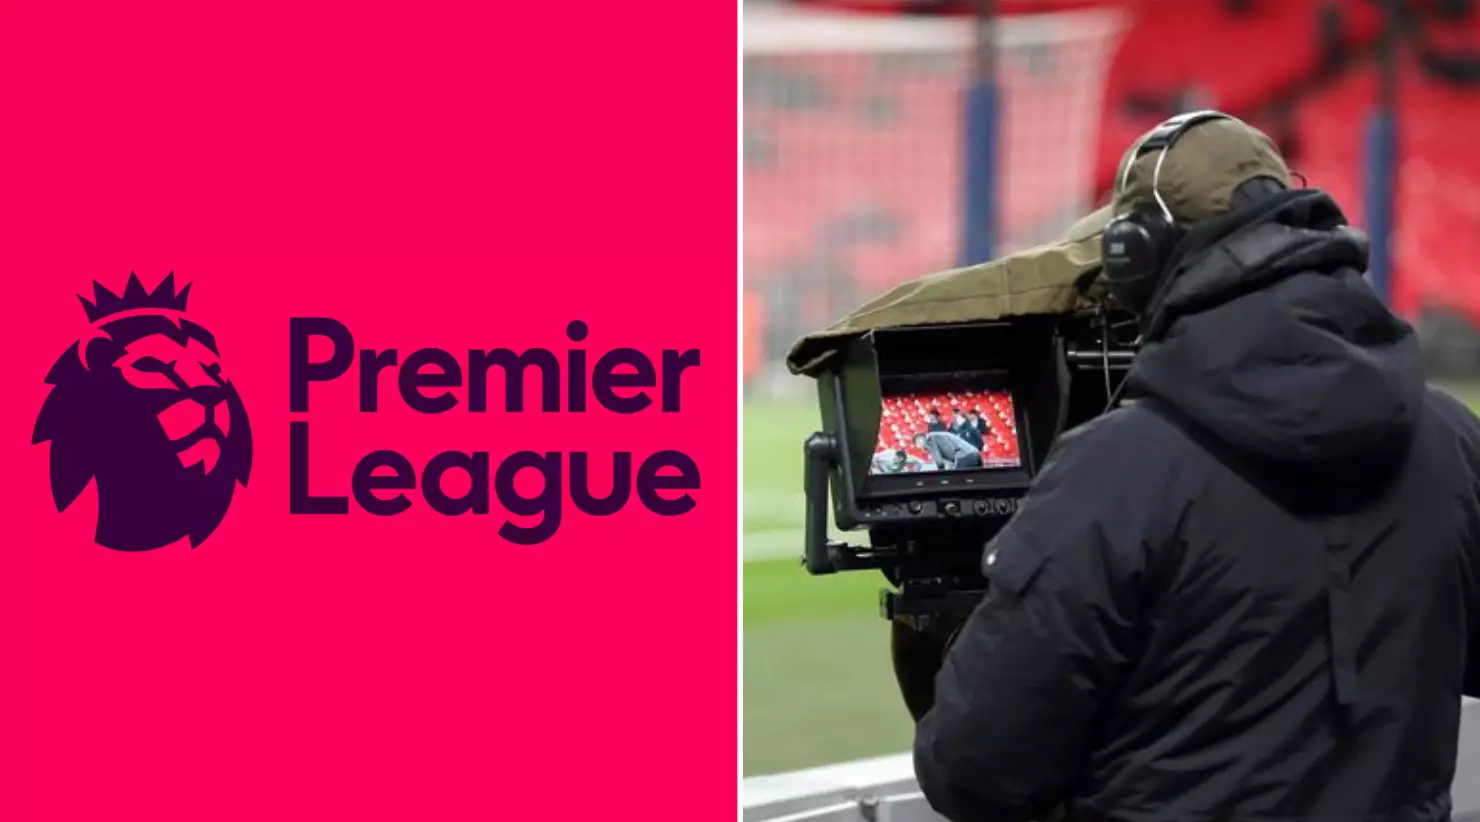 Only One Club Voted Against The Controversial Pay-Per-View Service For Premier League Matches